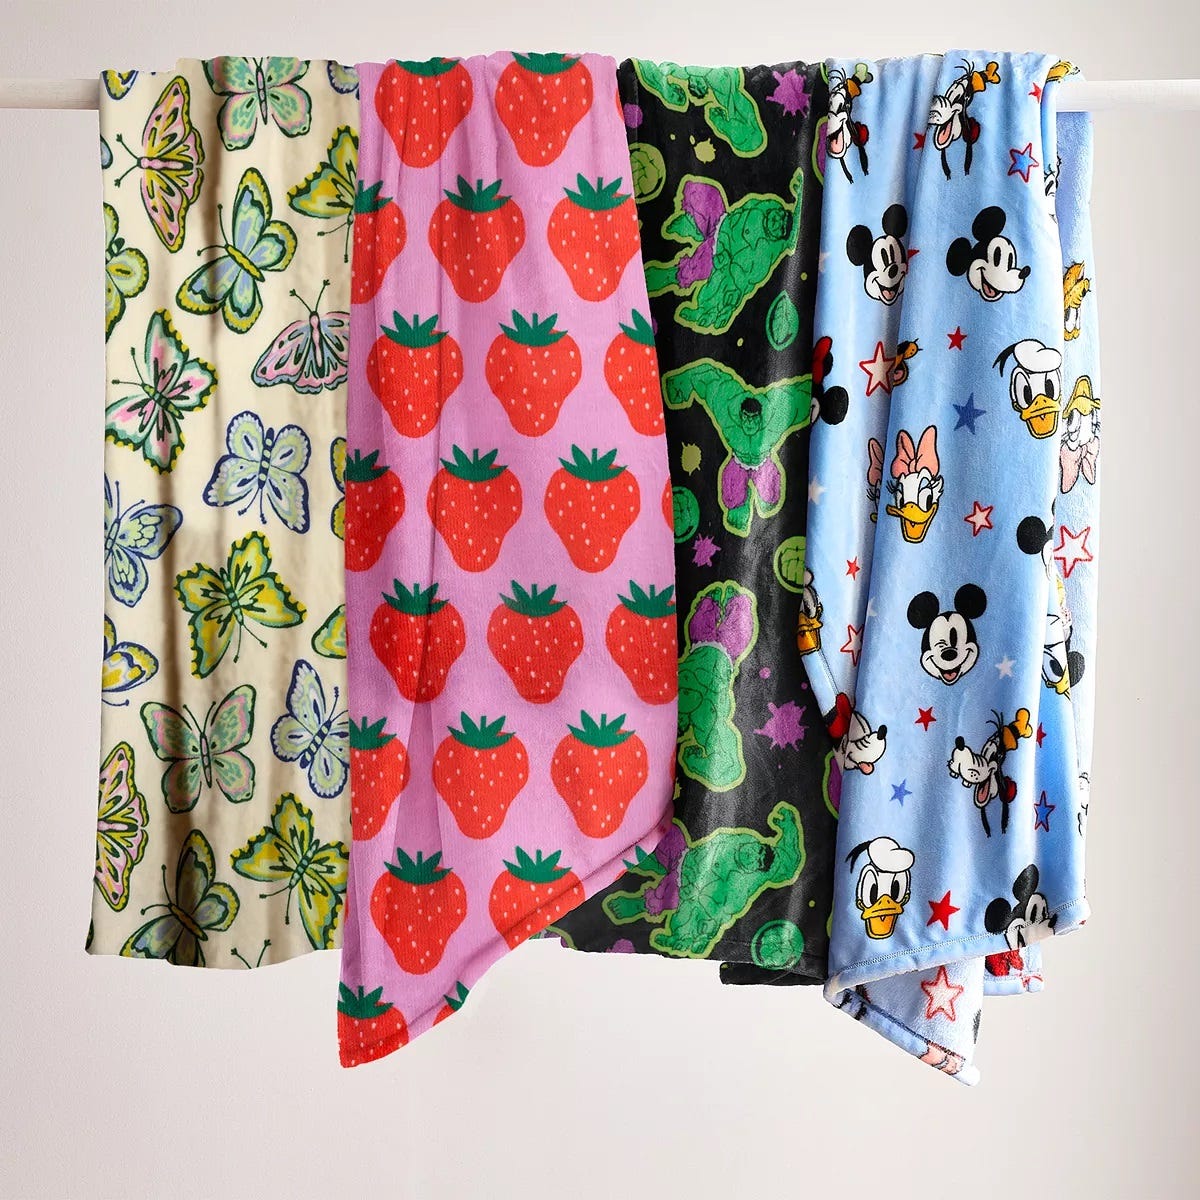 Four hanging textiles with different patterns: butterflies, strawberries, turtles, and cartoon characters.